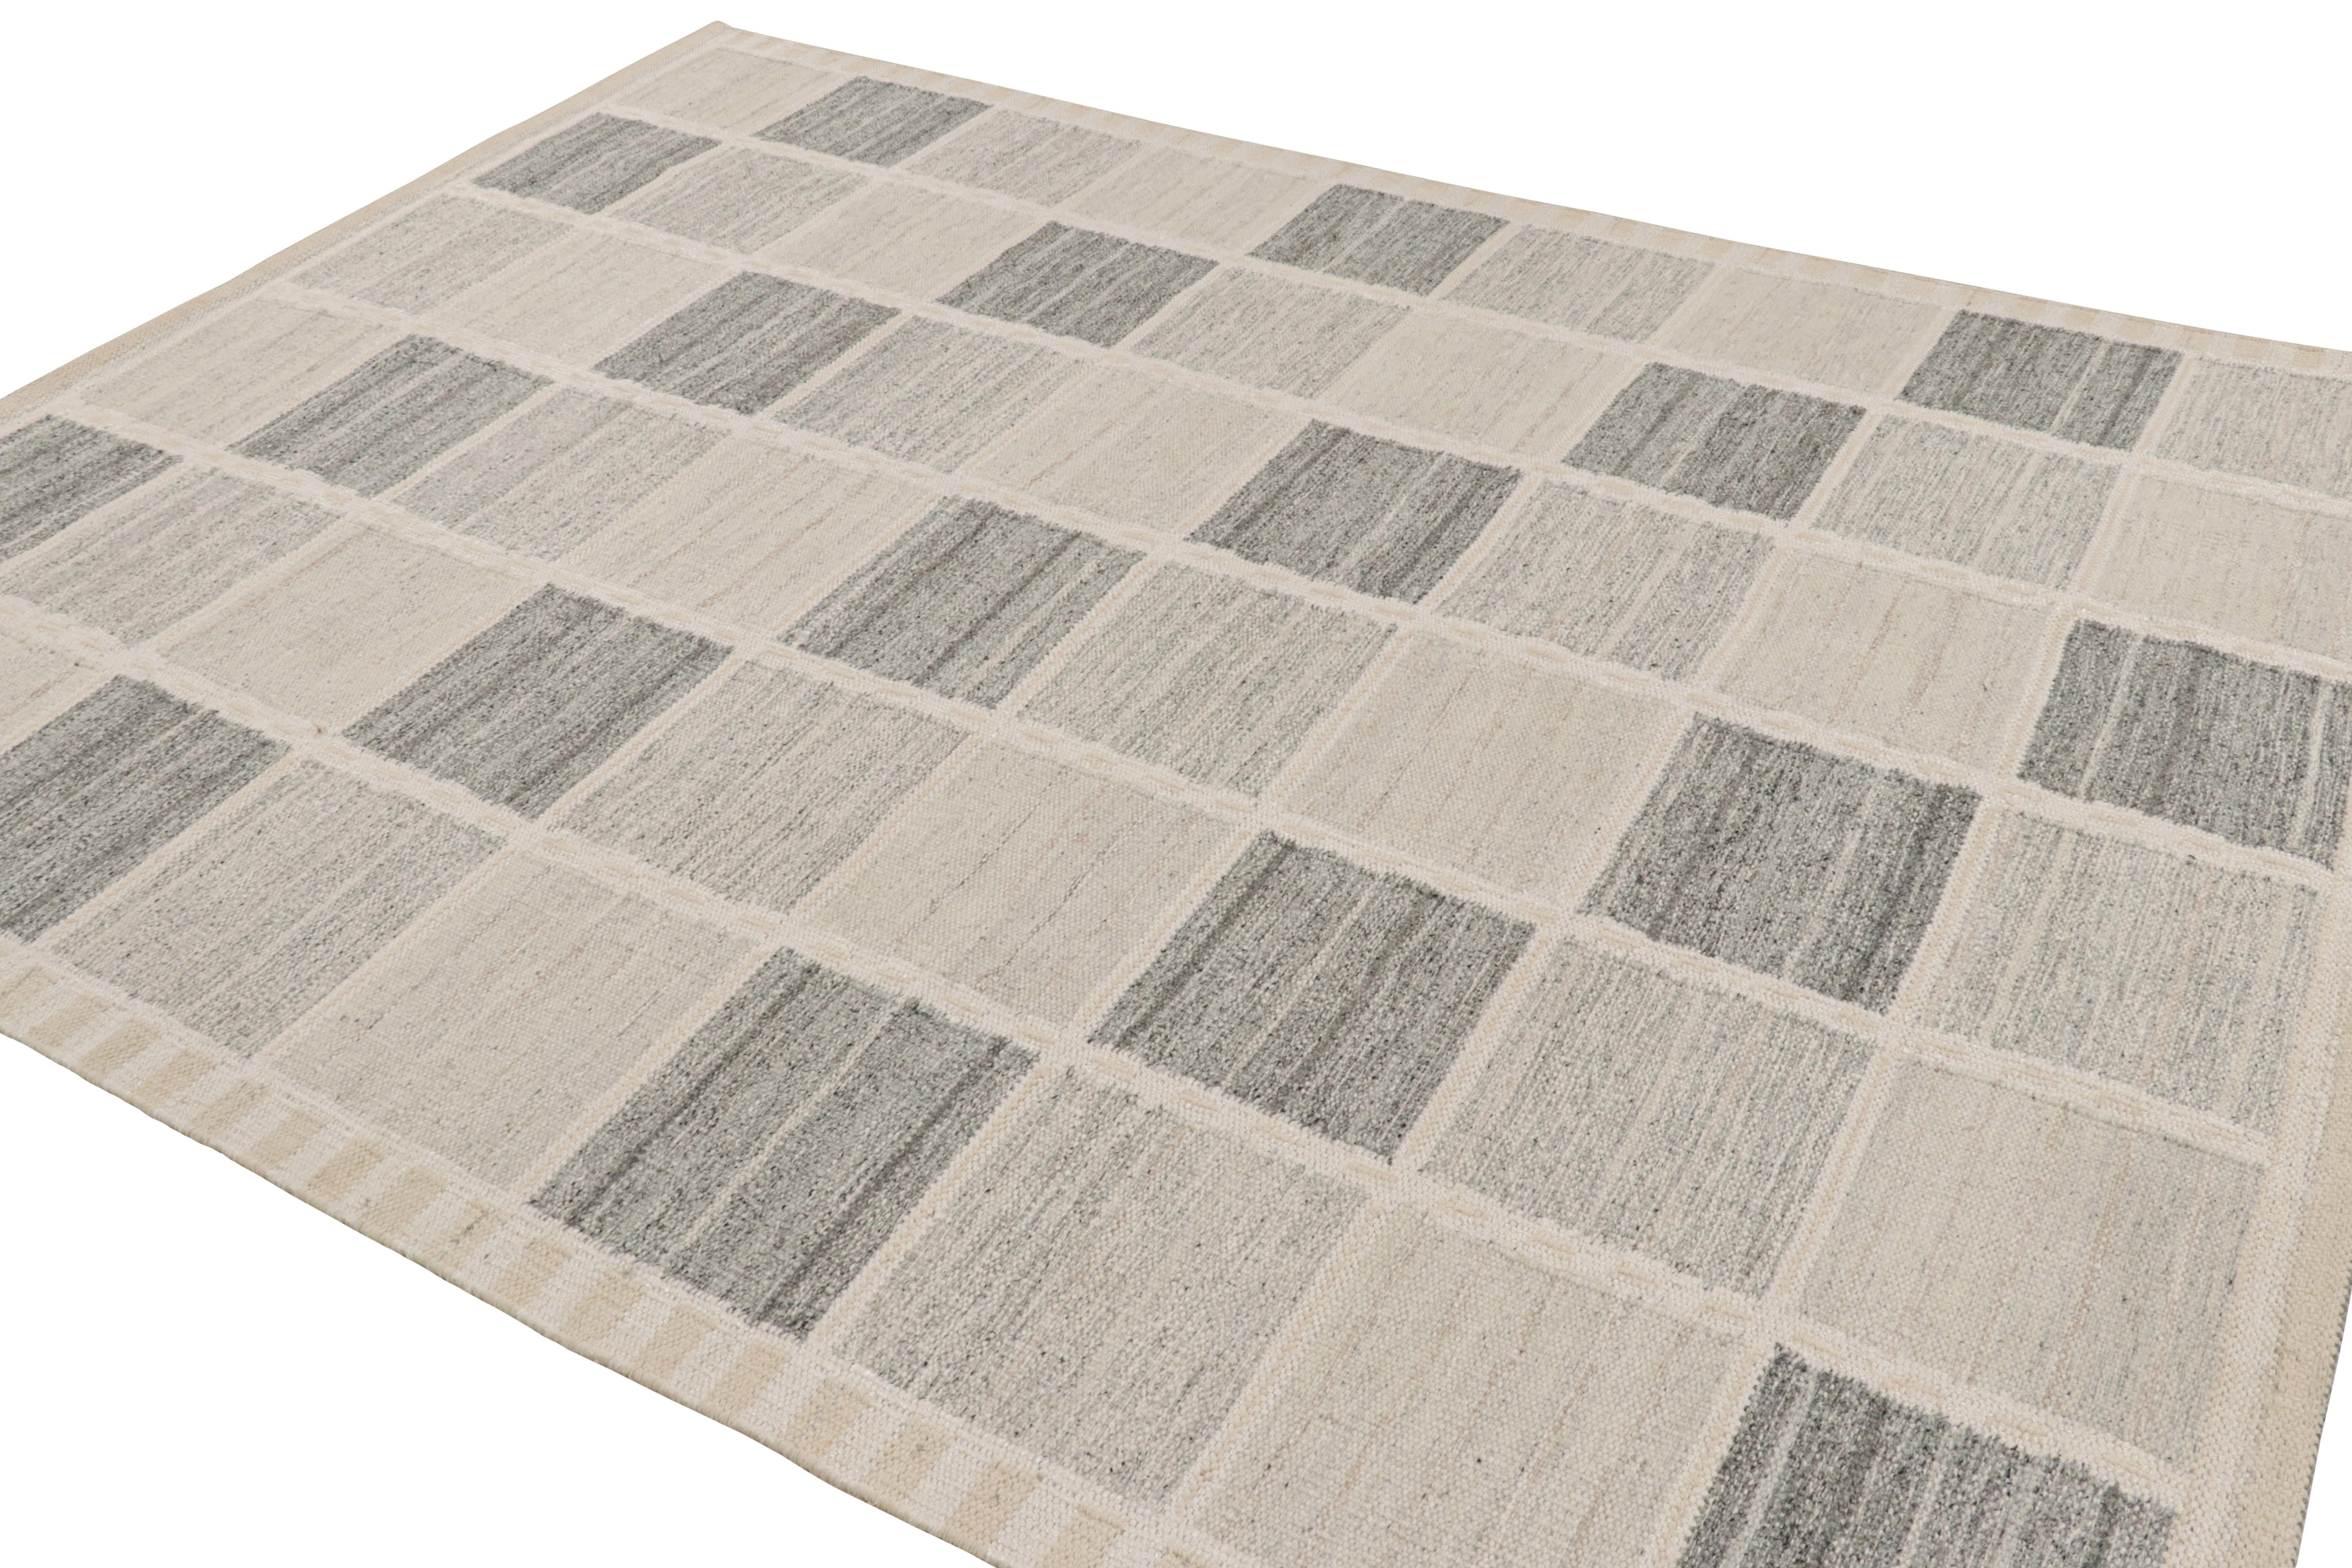 Indian Rug & Kilim’s Scandinavian Style Rug in Beige and Gray Geometric Patterns For Sale